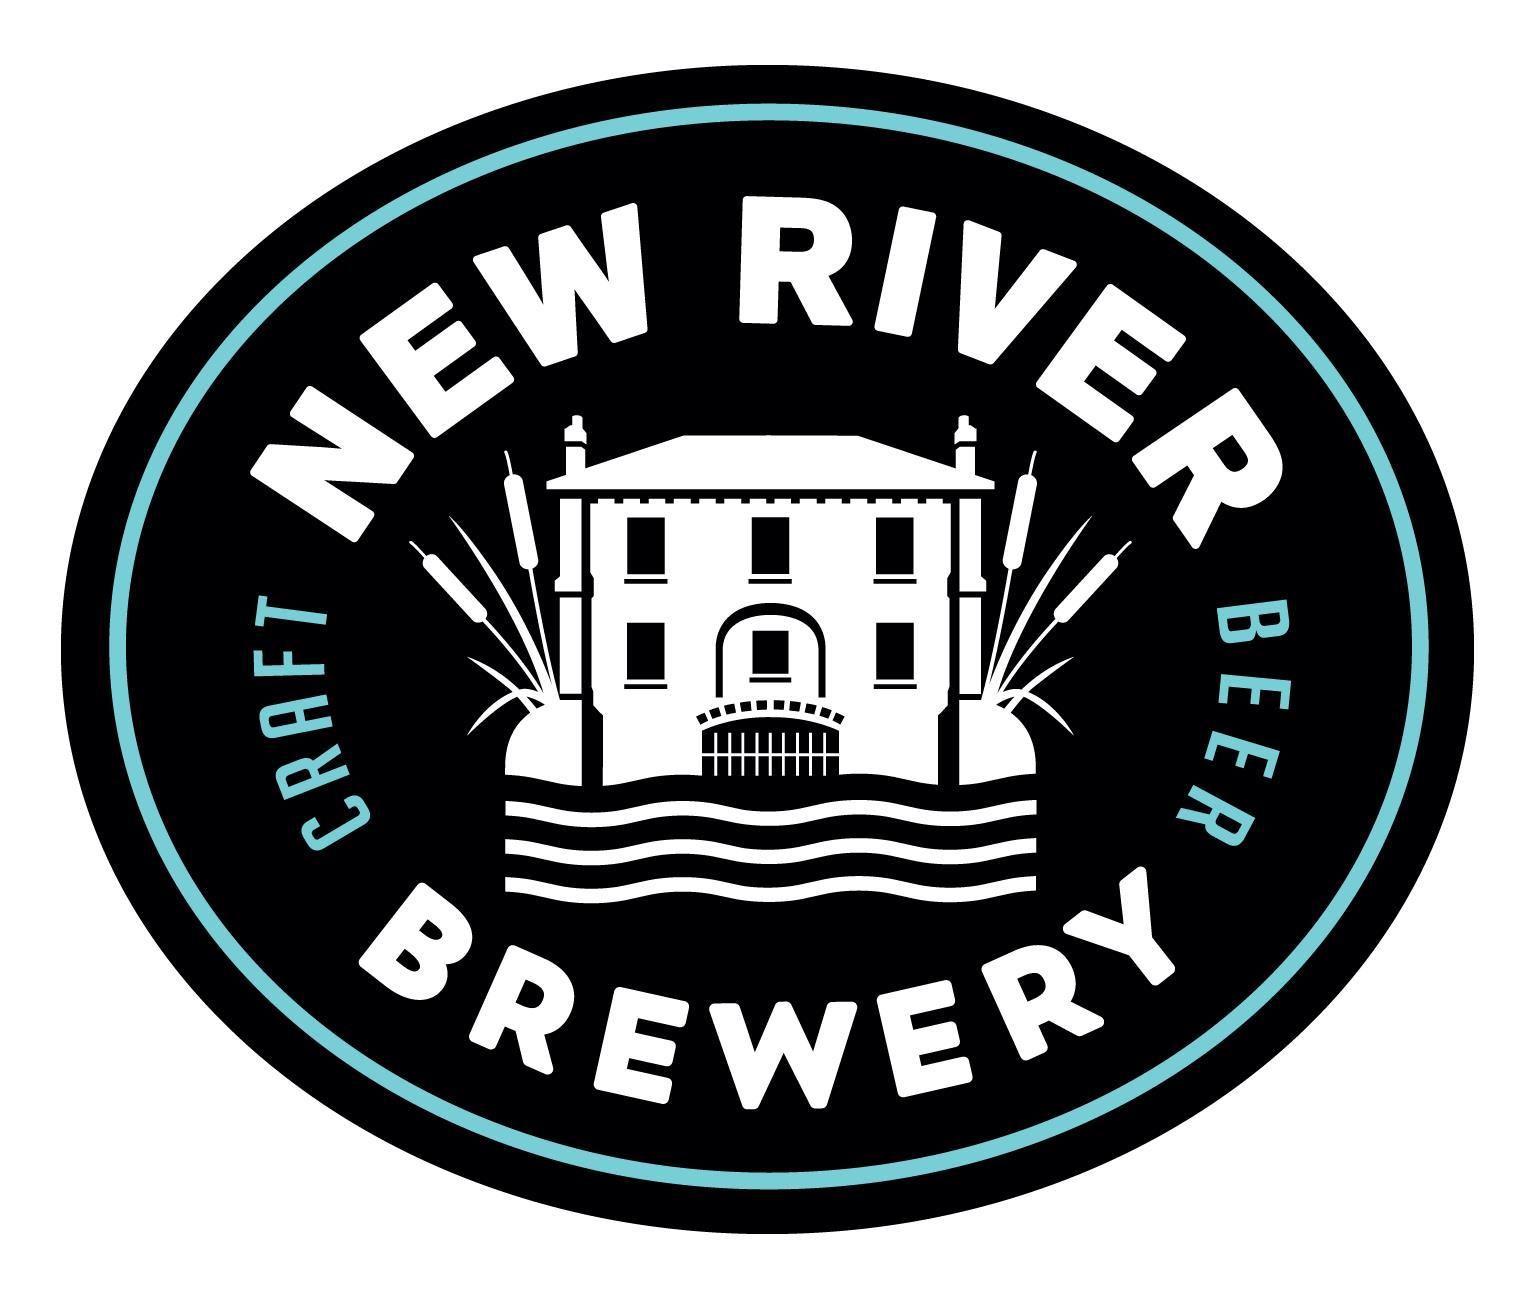 New River Logo - New River Brewery Hoddesdon - Find Real Ale Beer and Cider in Hoddesdon